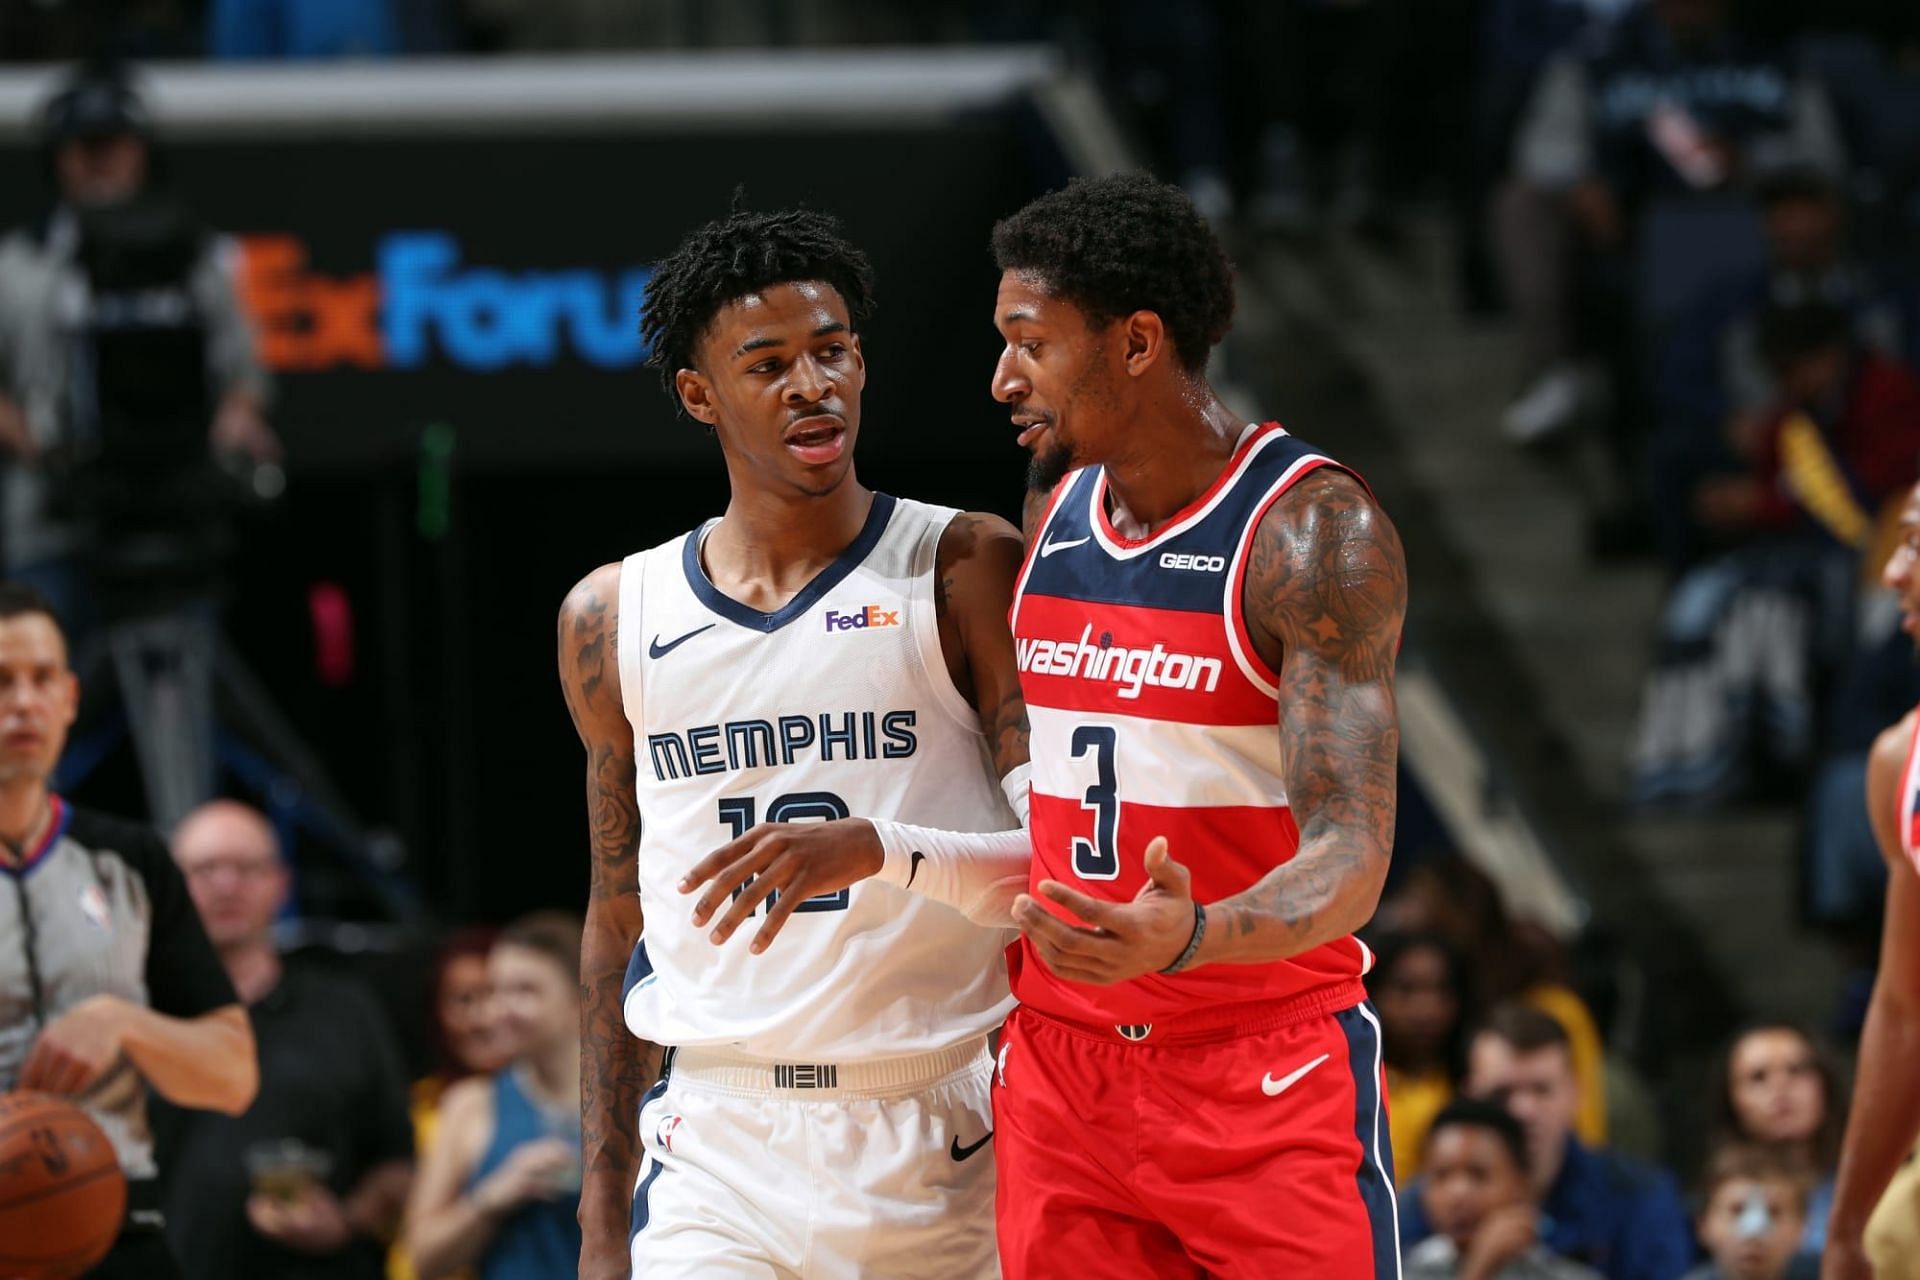 It will be an exciting shootout when the Memphis Grizzlies visit the Washington Wizards on Friday. [Photo: Wiz of Awes]